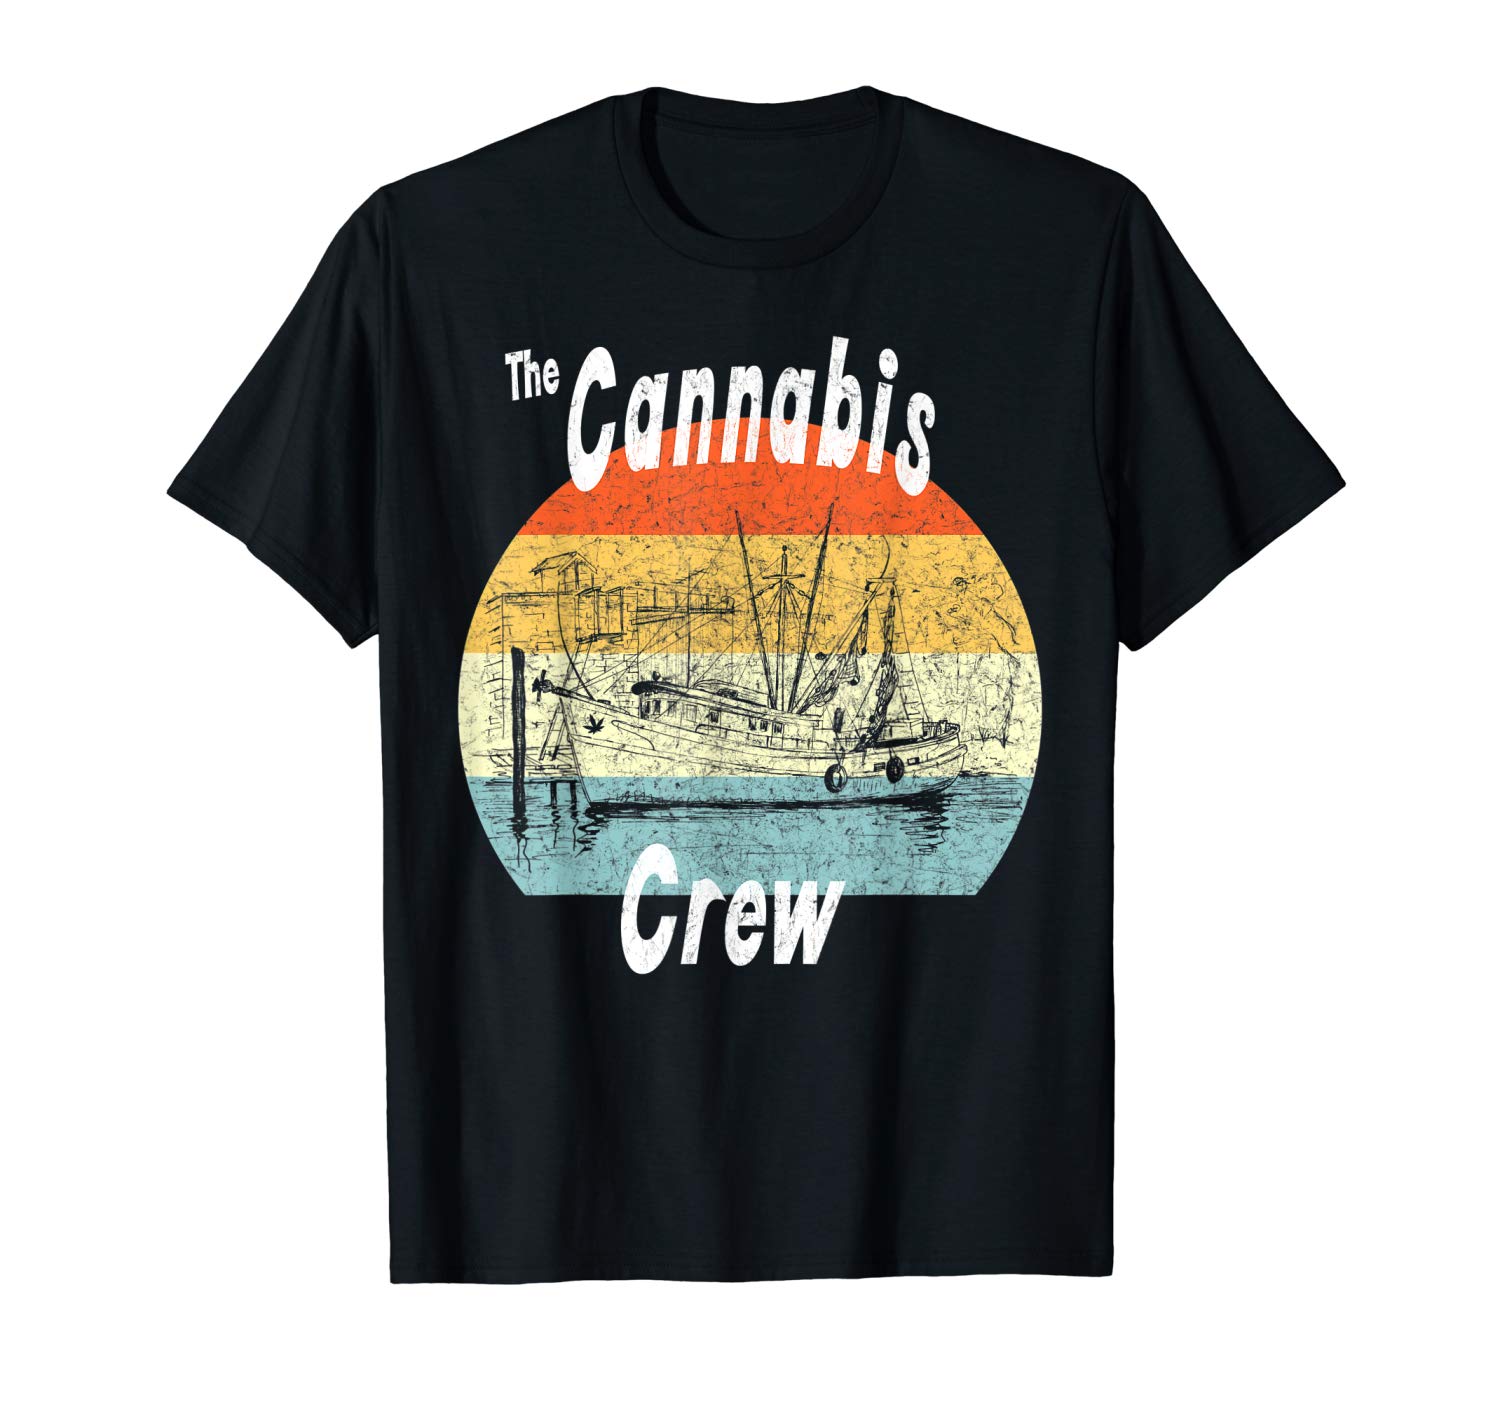 An image of a black colored Retro Cannabis Crew T-shirt from Ganja Outpost.